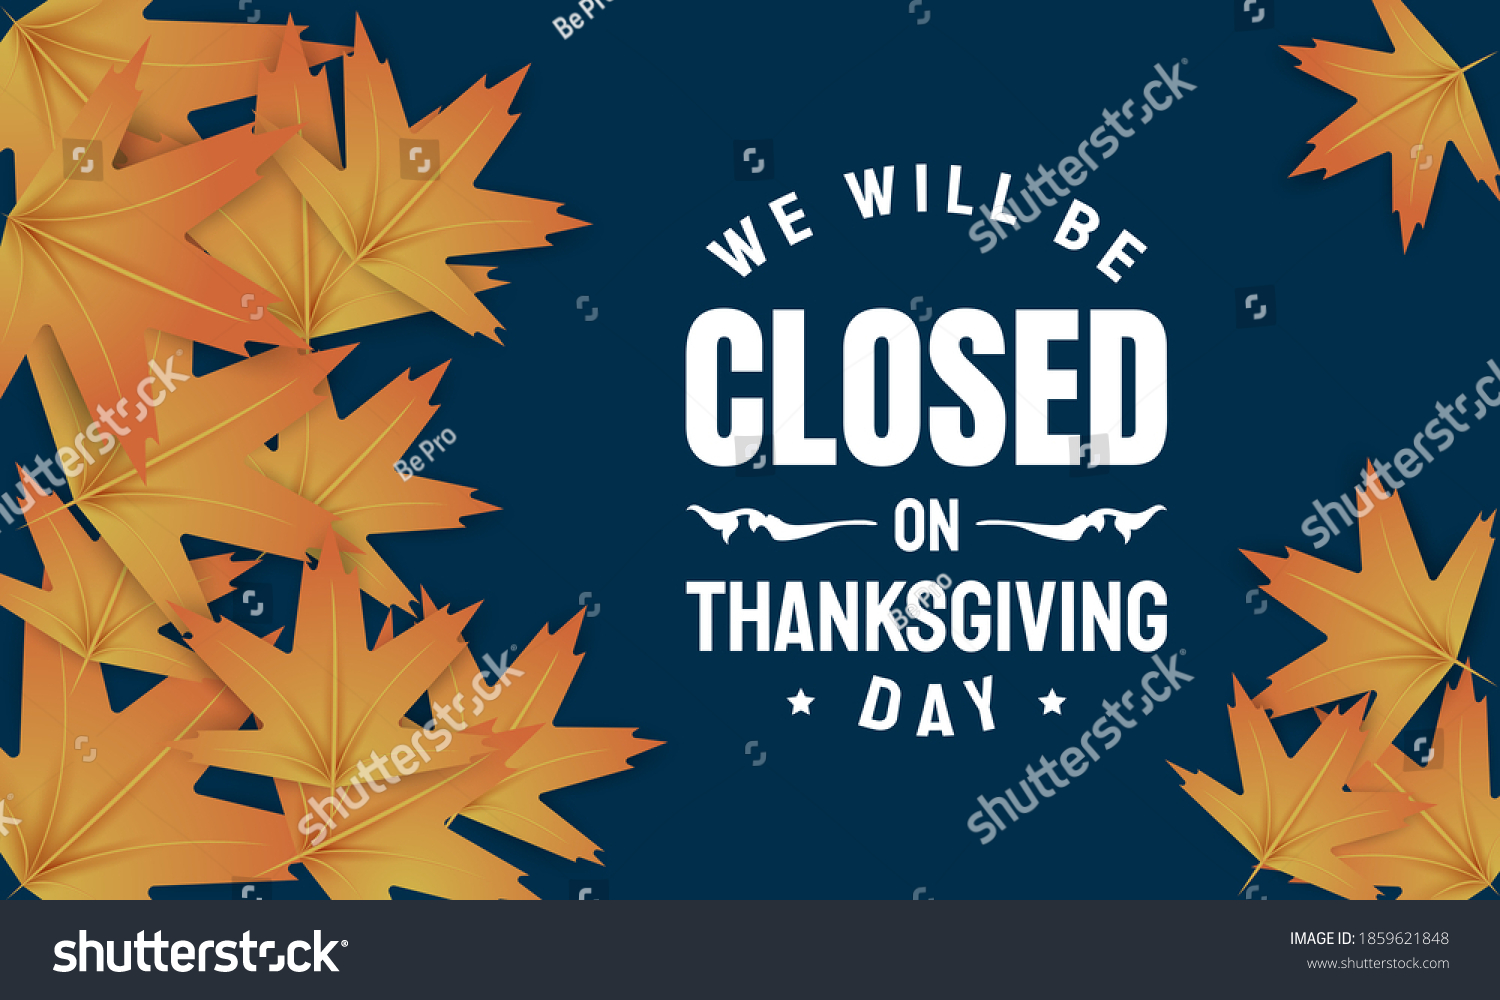 Thanksgiving Day Background Design. We will be Closed on Thanksgiving Day. Vector Illustration. #1859621848